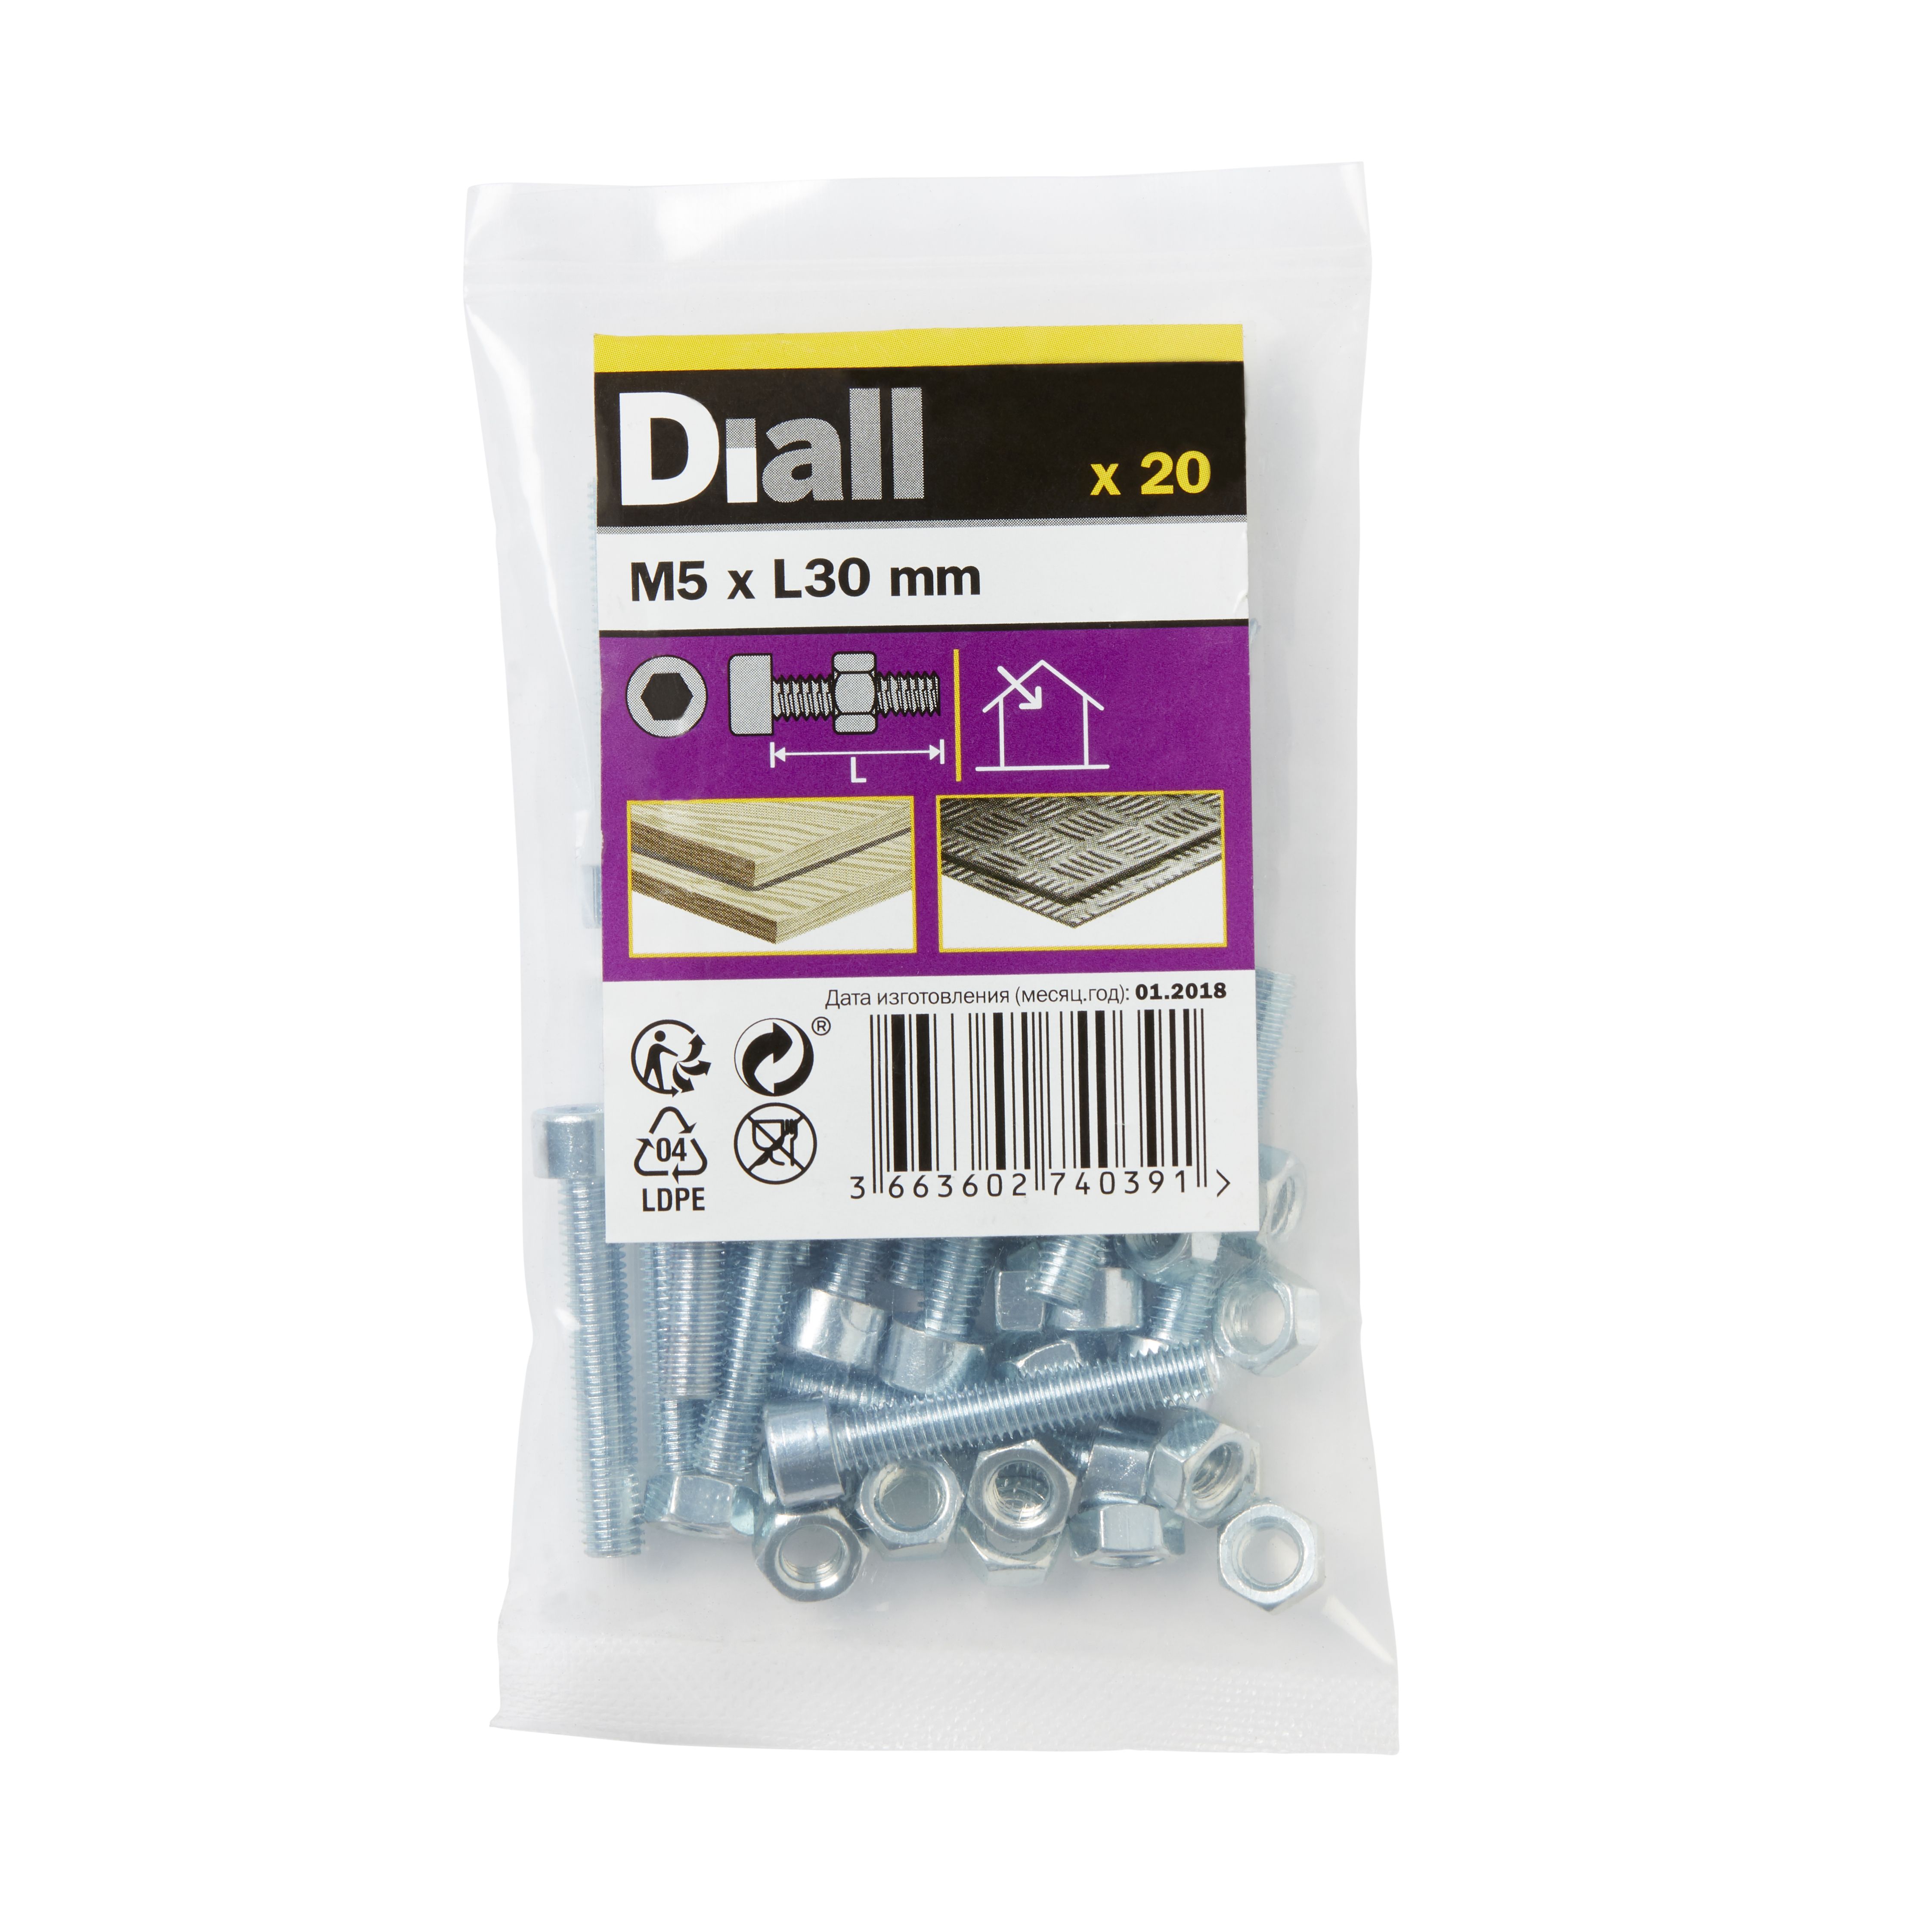 Diall M5 Cylindrical Zinc-plated Carbon steel Set screw & nut (Dia)5mm (L)30mm, Pack of 20